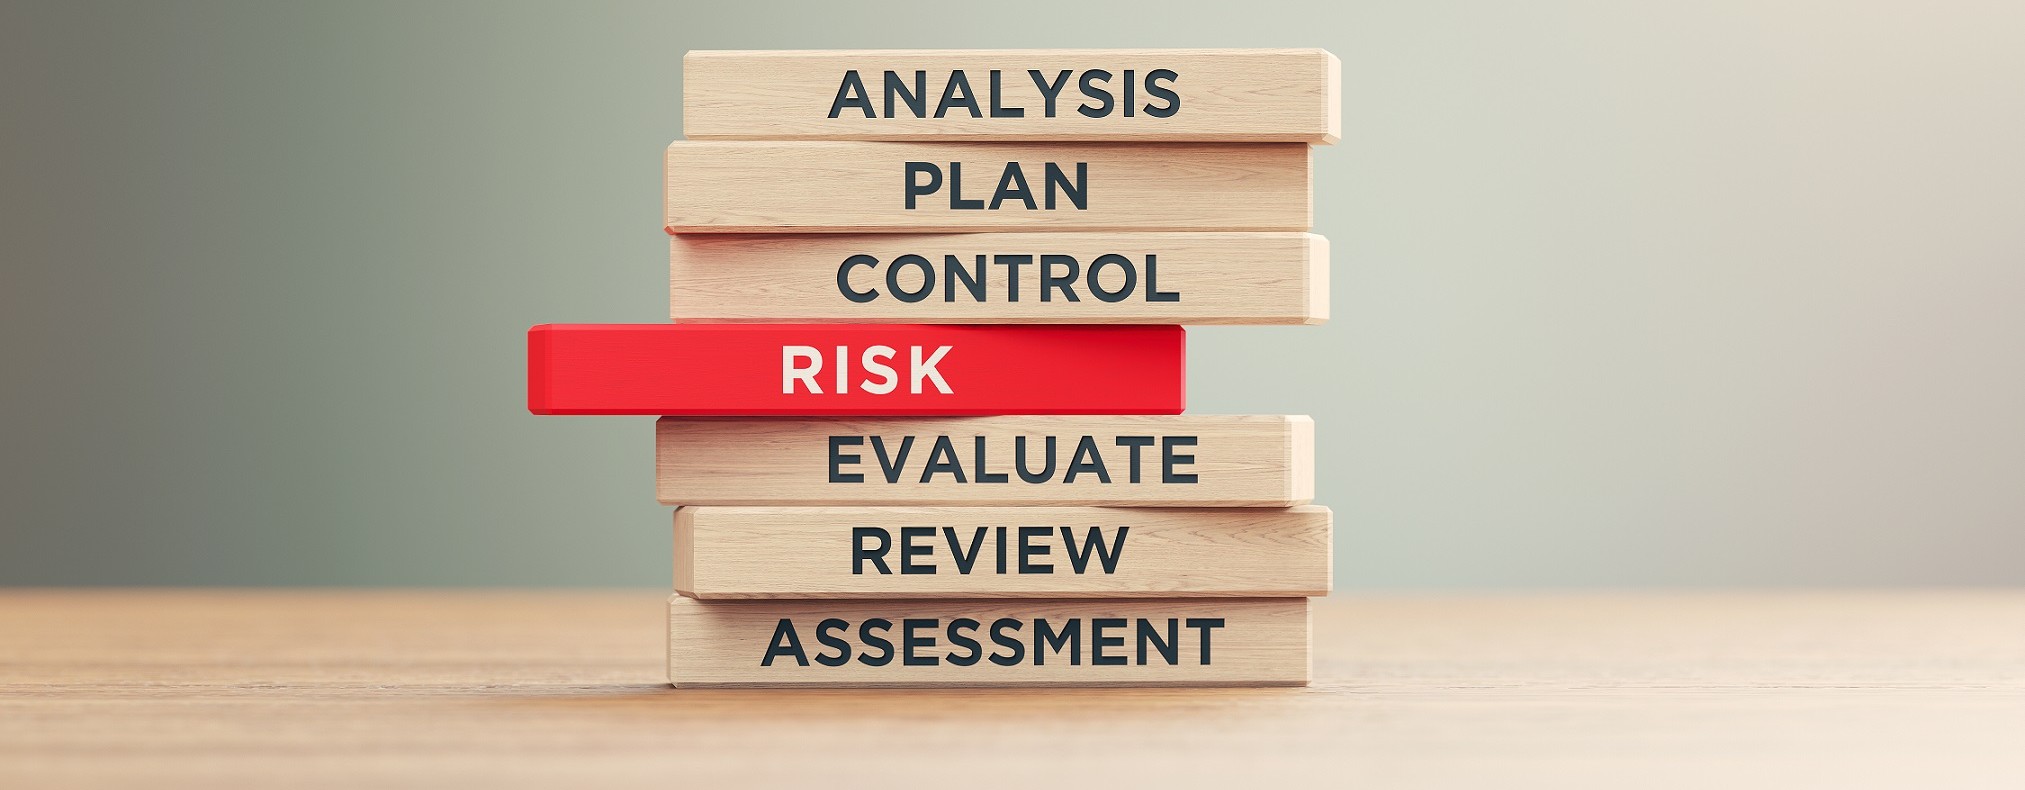 Analysis - Plan - Control - Risk - Evaluate - Review - Assessment